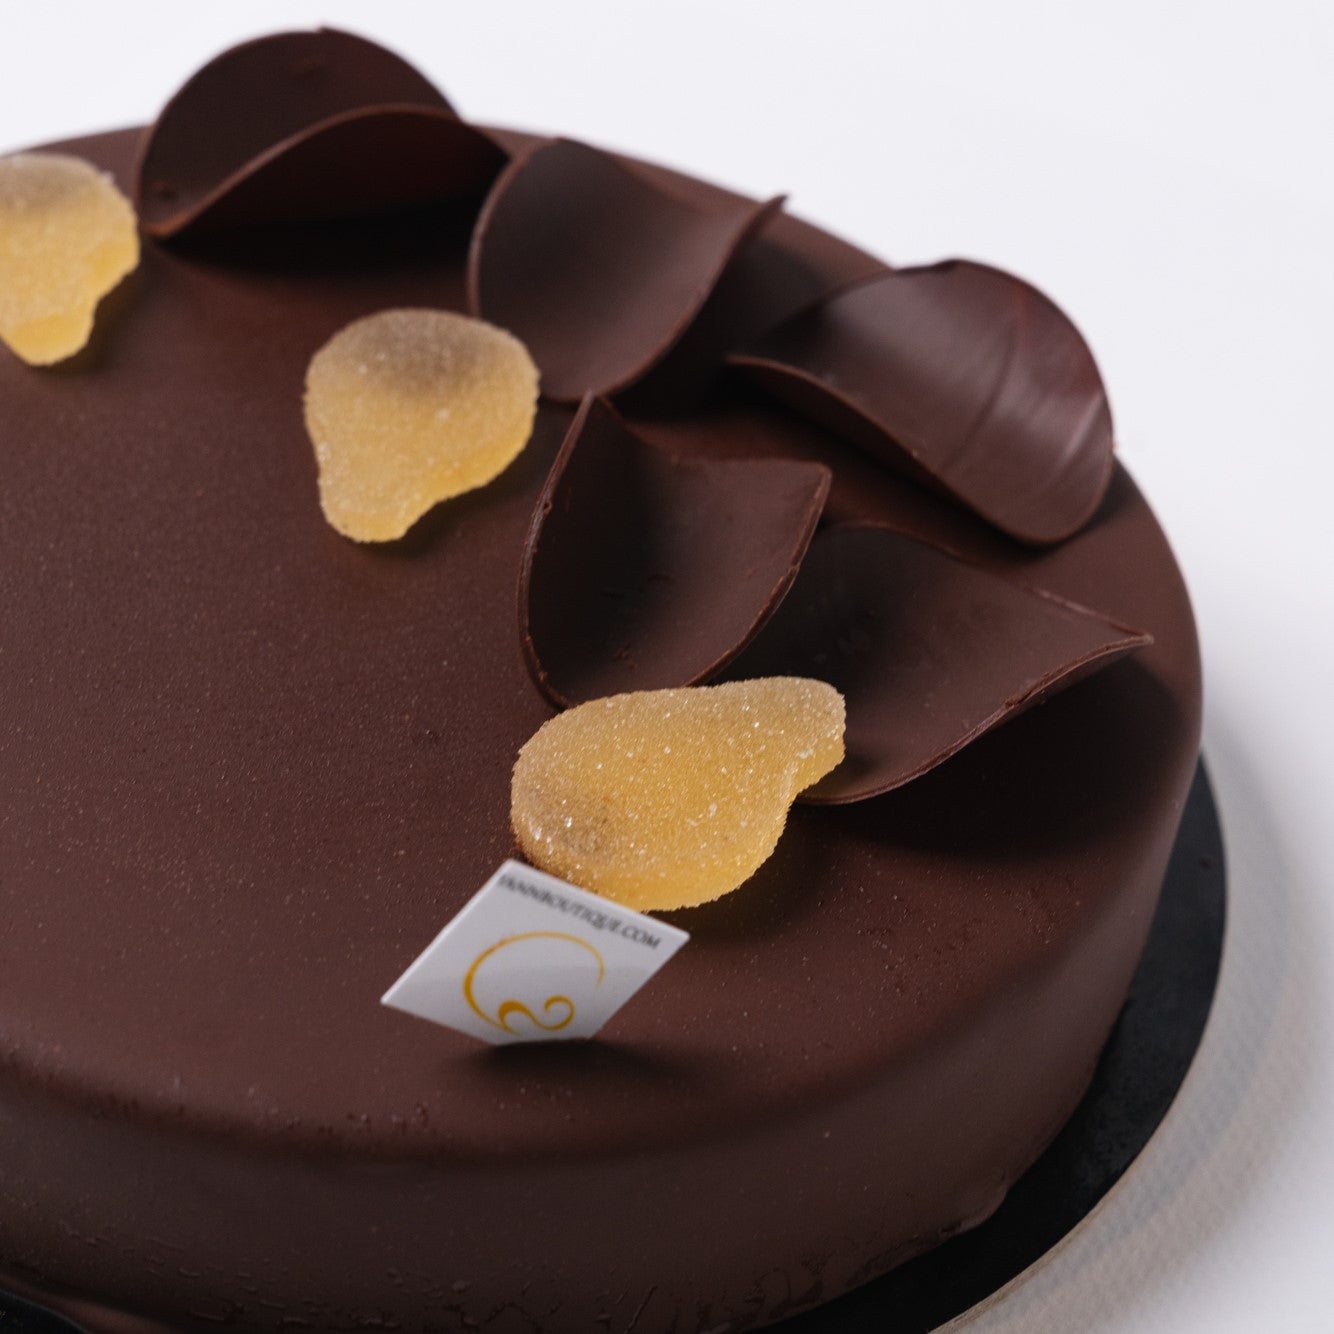 Looking for a plant based chocolate cake? This cake is for you! Desserts, macarons, cakes, croissants, bread, ice cream & more are Yann Haute Patisserie, authentic French pastry & bake shop since 2009 - FREE PARKING at the back of the yellow house.